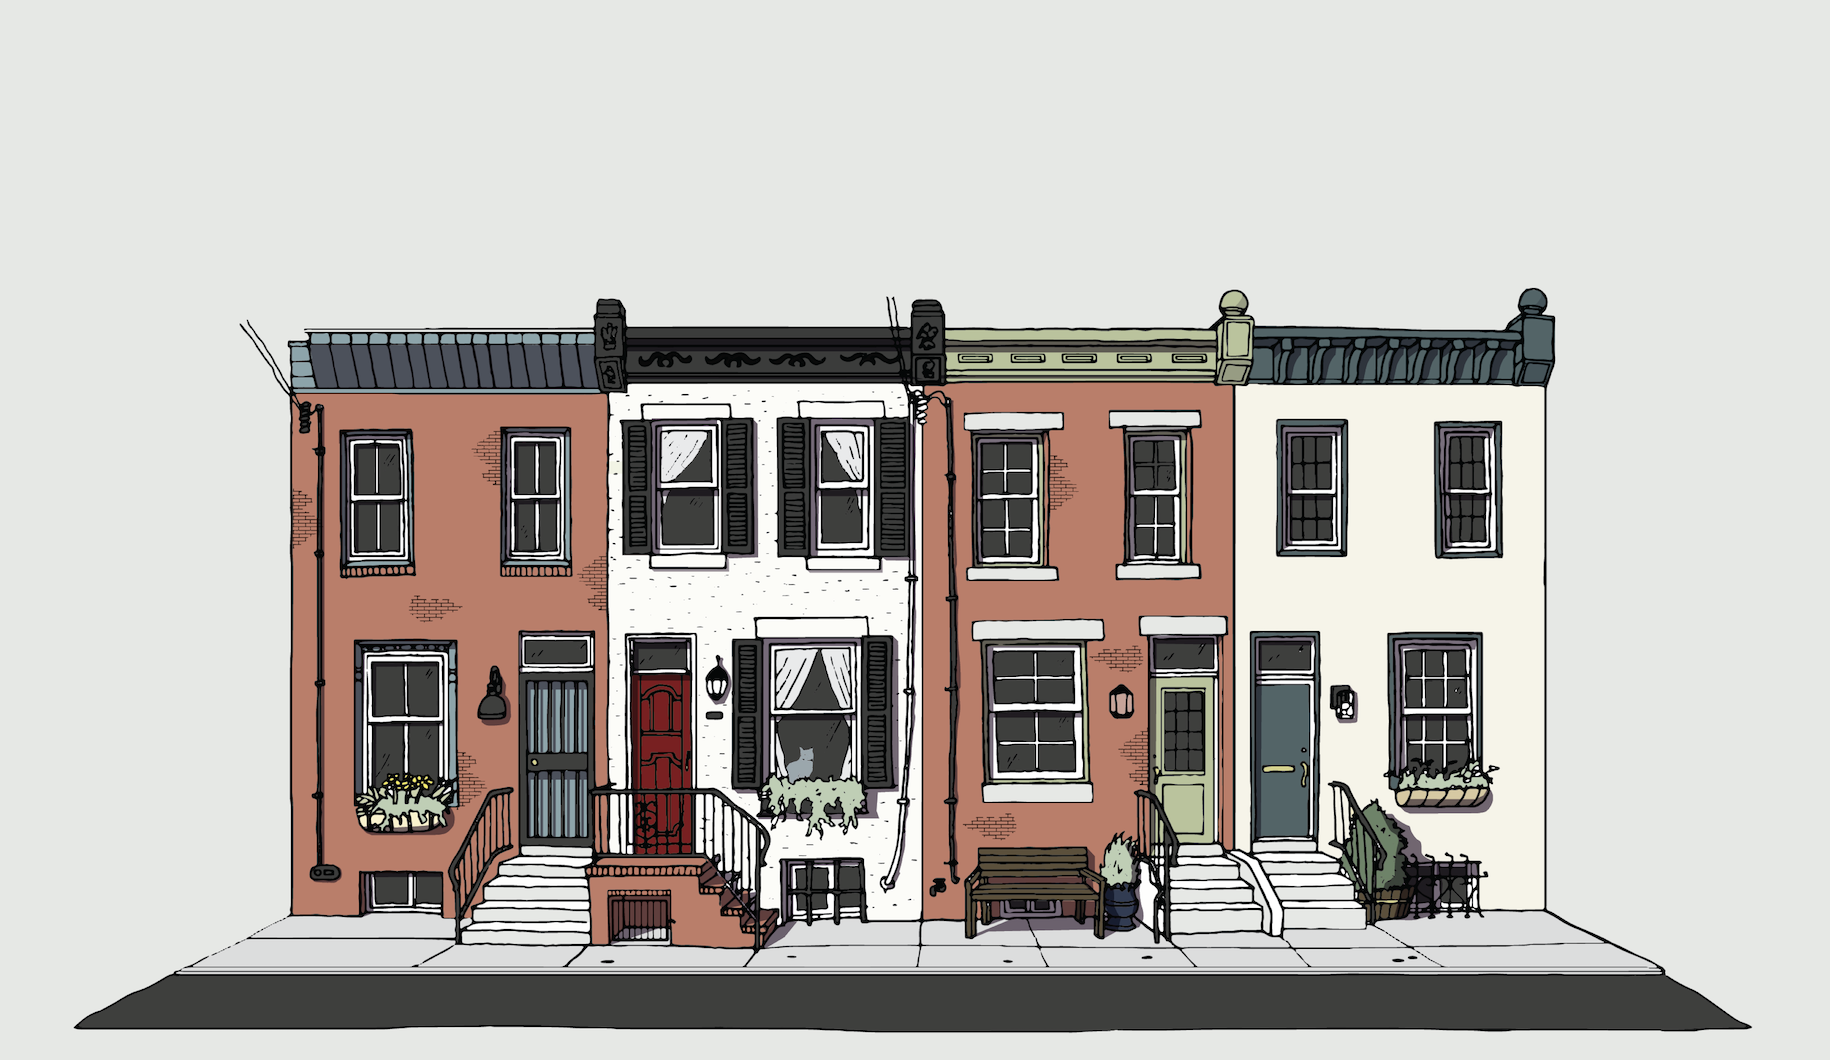 Passive Rowhouse Manual: Summer 2021 Release!